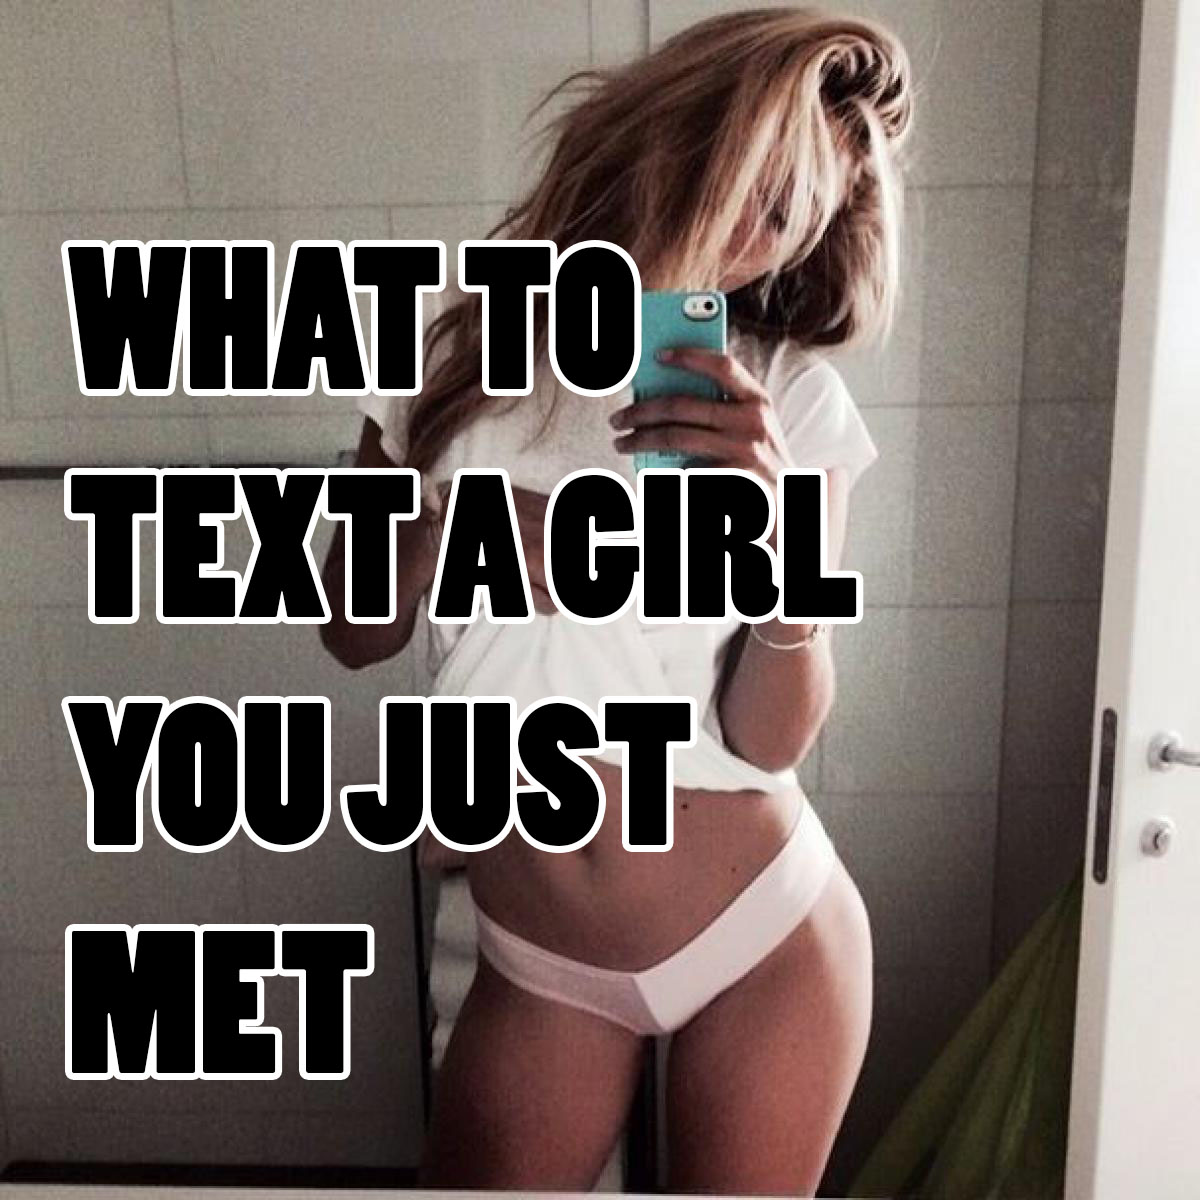 WHAT TO TEXT A GIRL YOU JUST MET